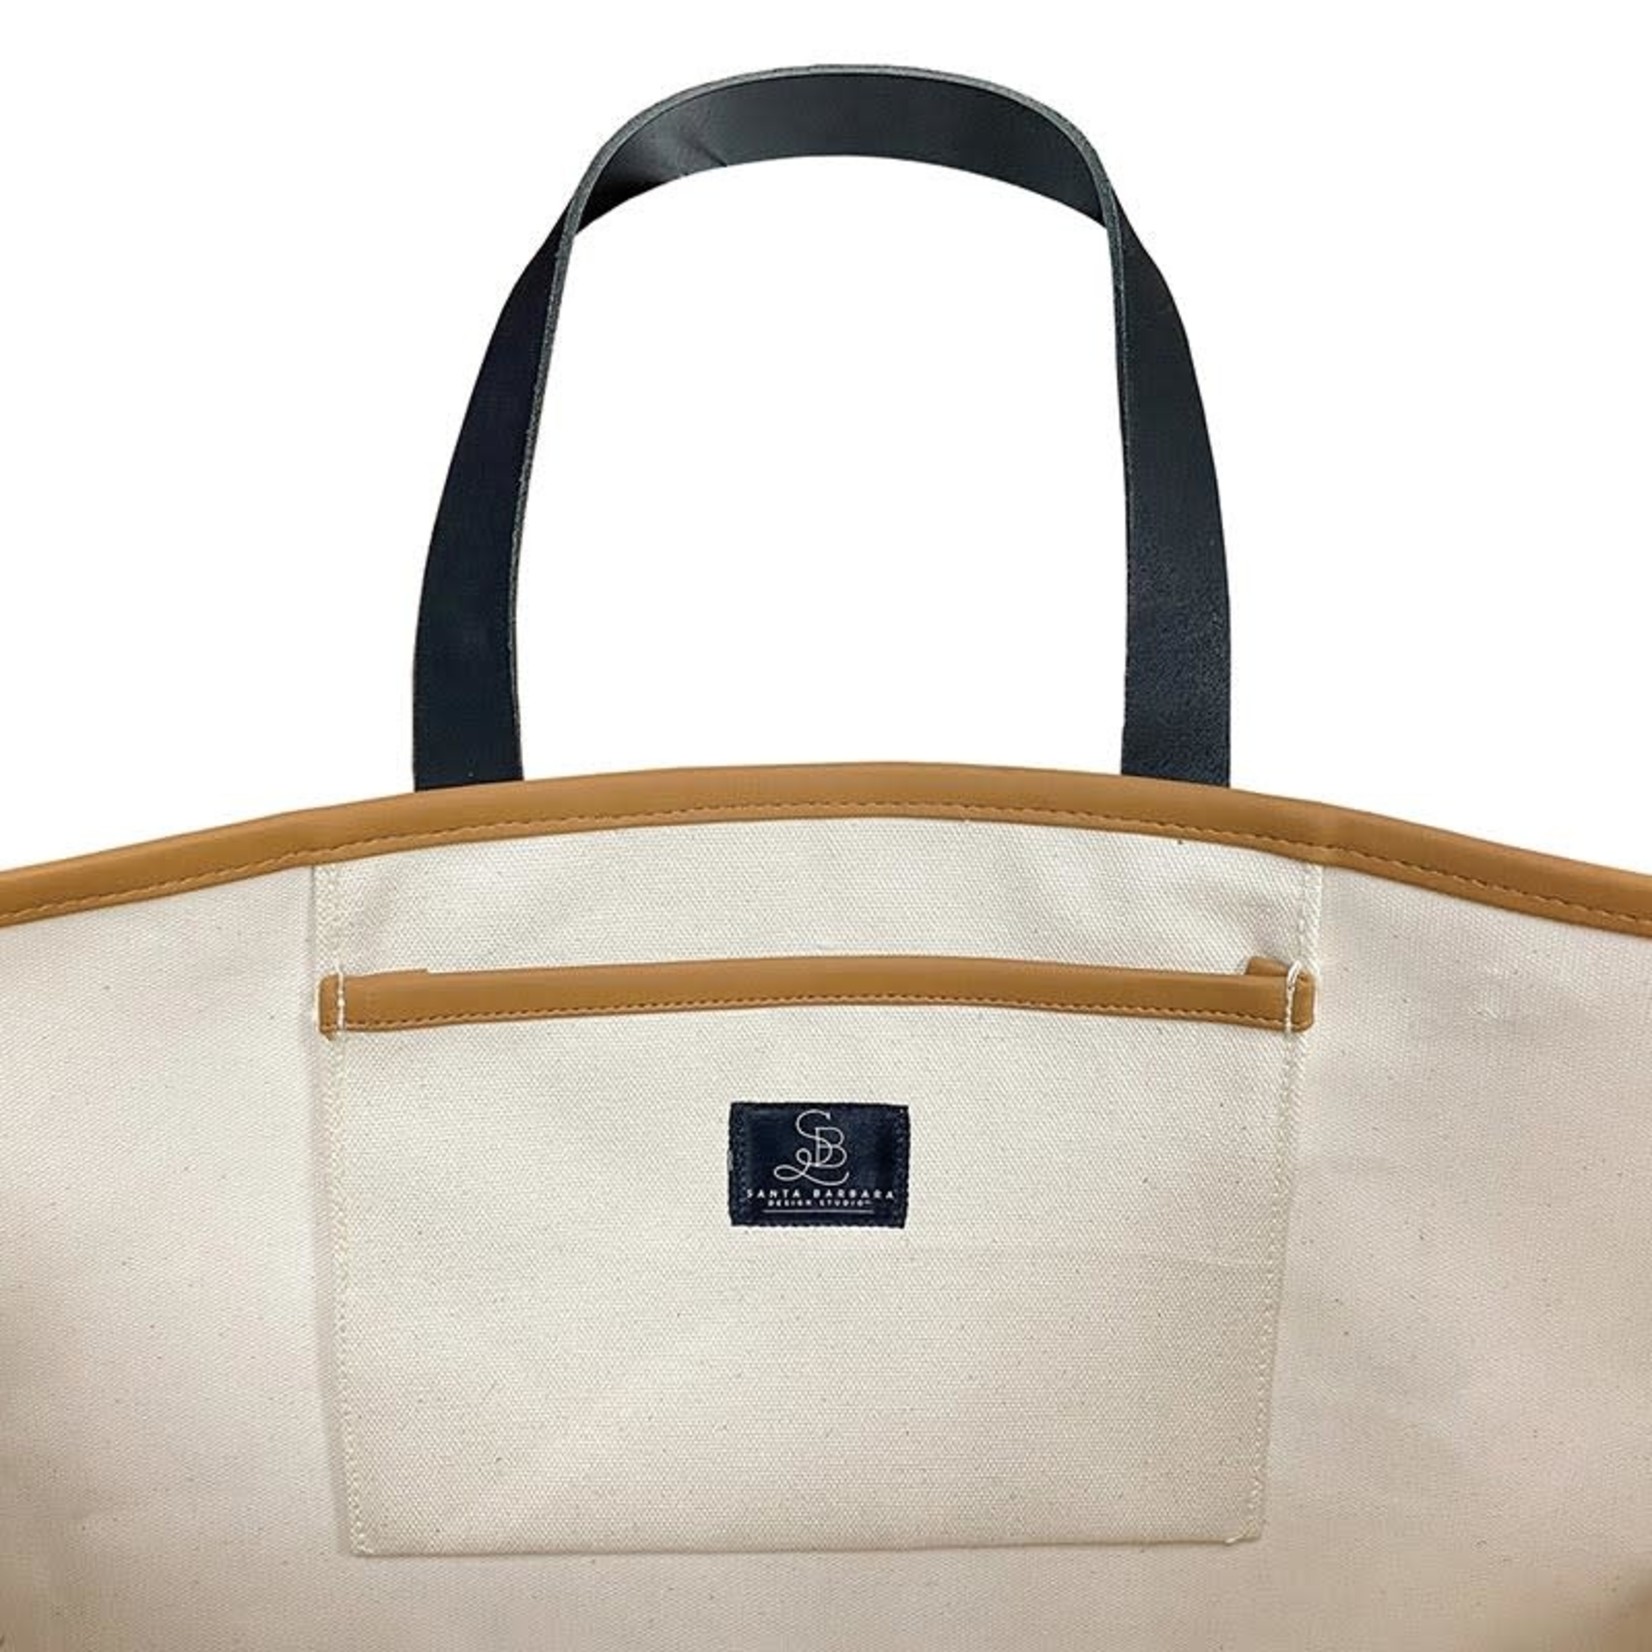 Tote/Canvas Poolside